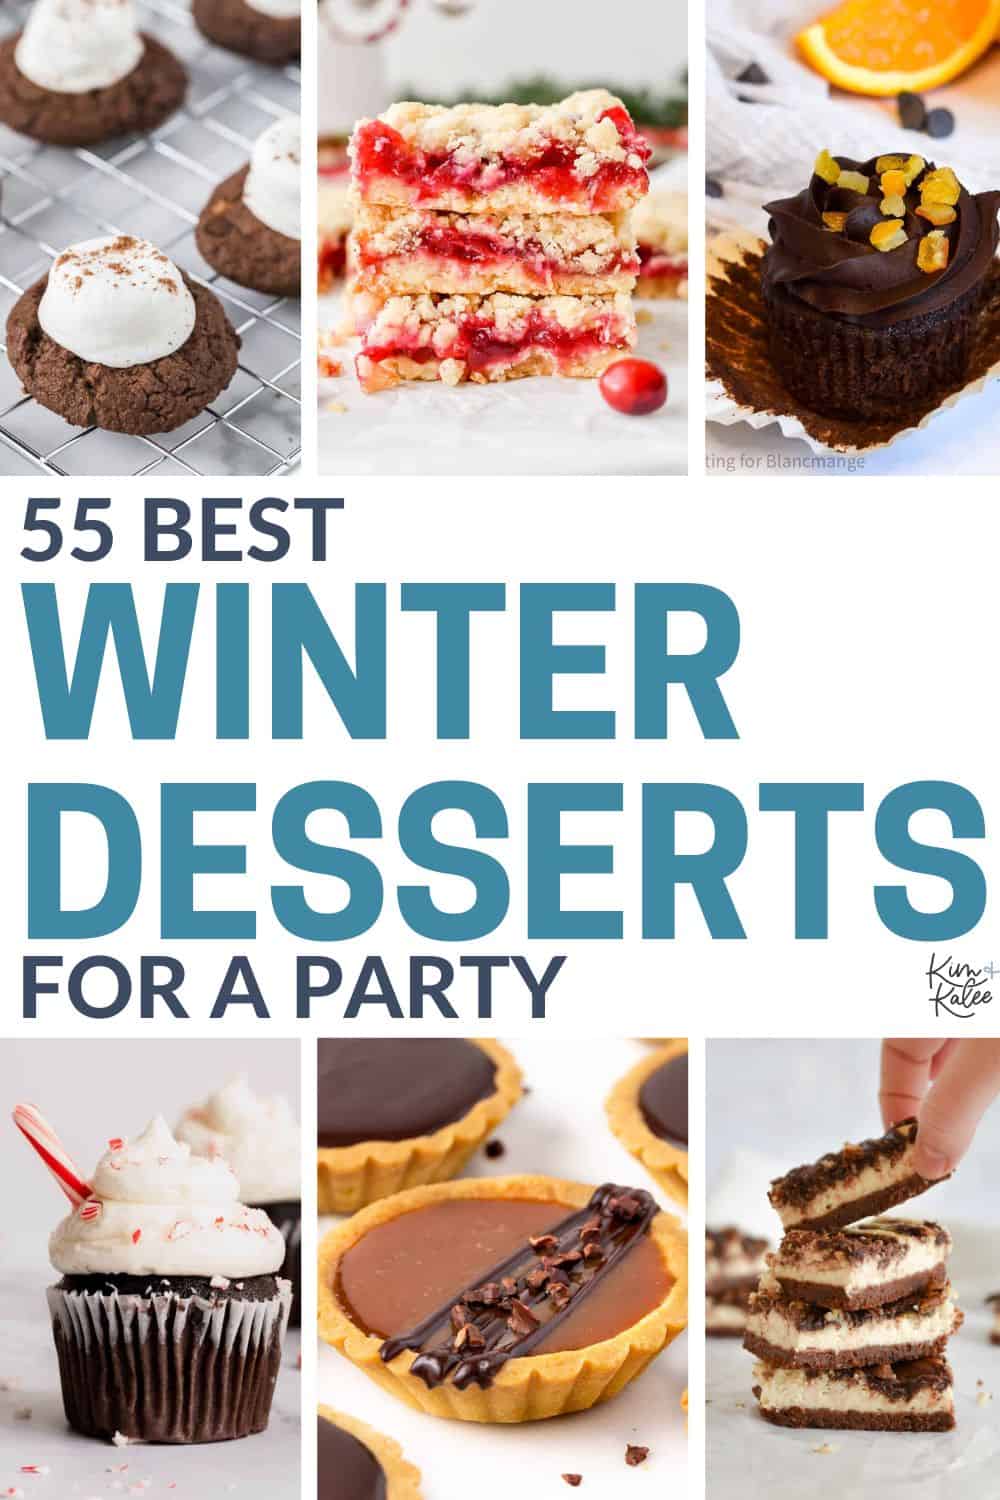 collage of 6 different desserts - text overlay in the middle says 55 best winter desserts for a party